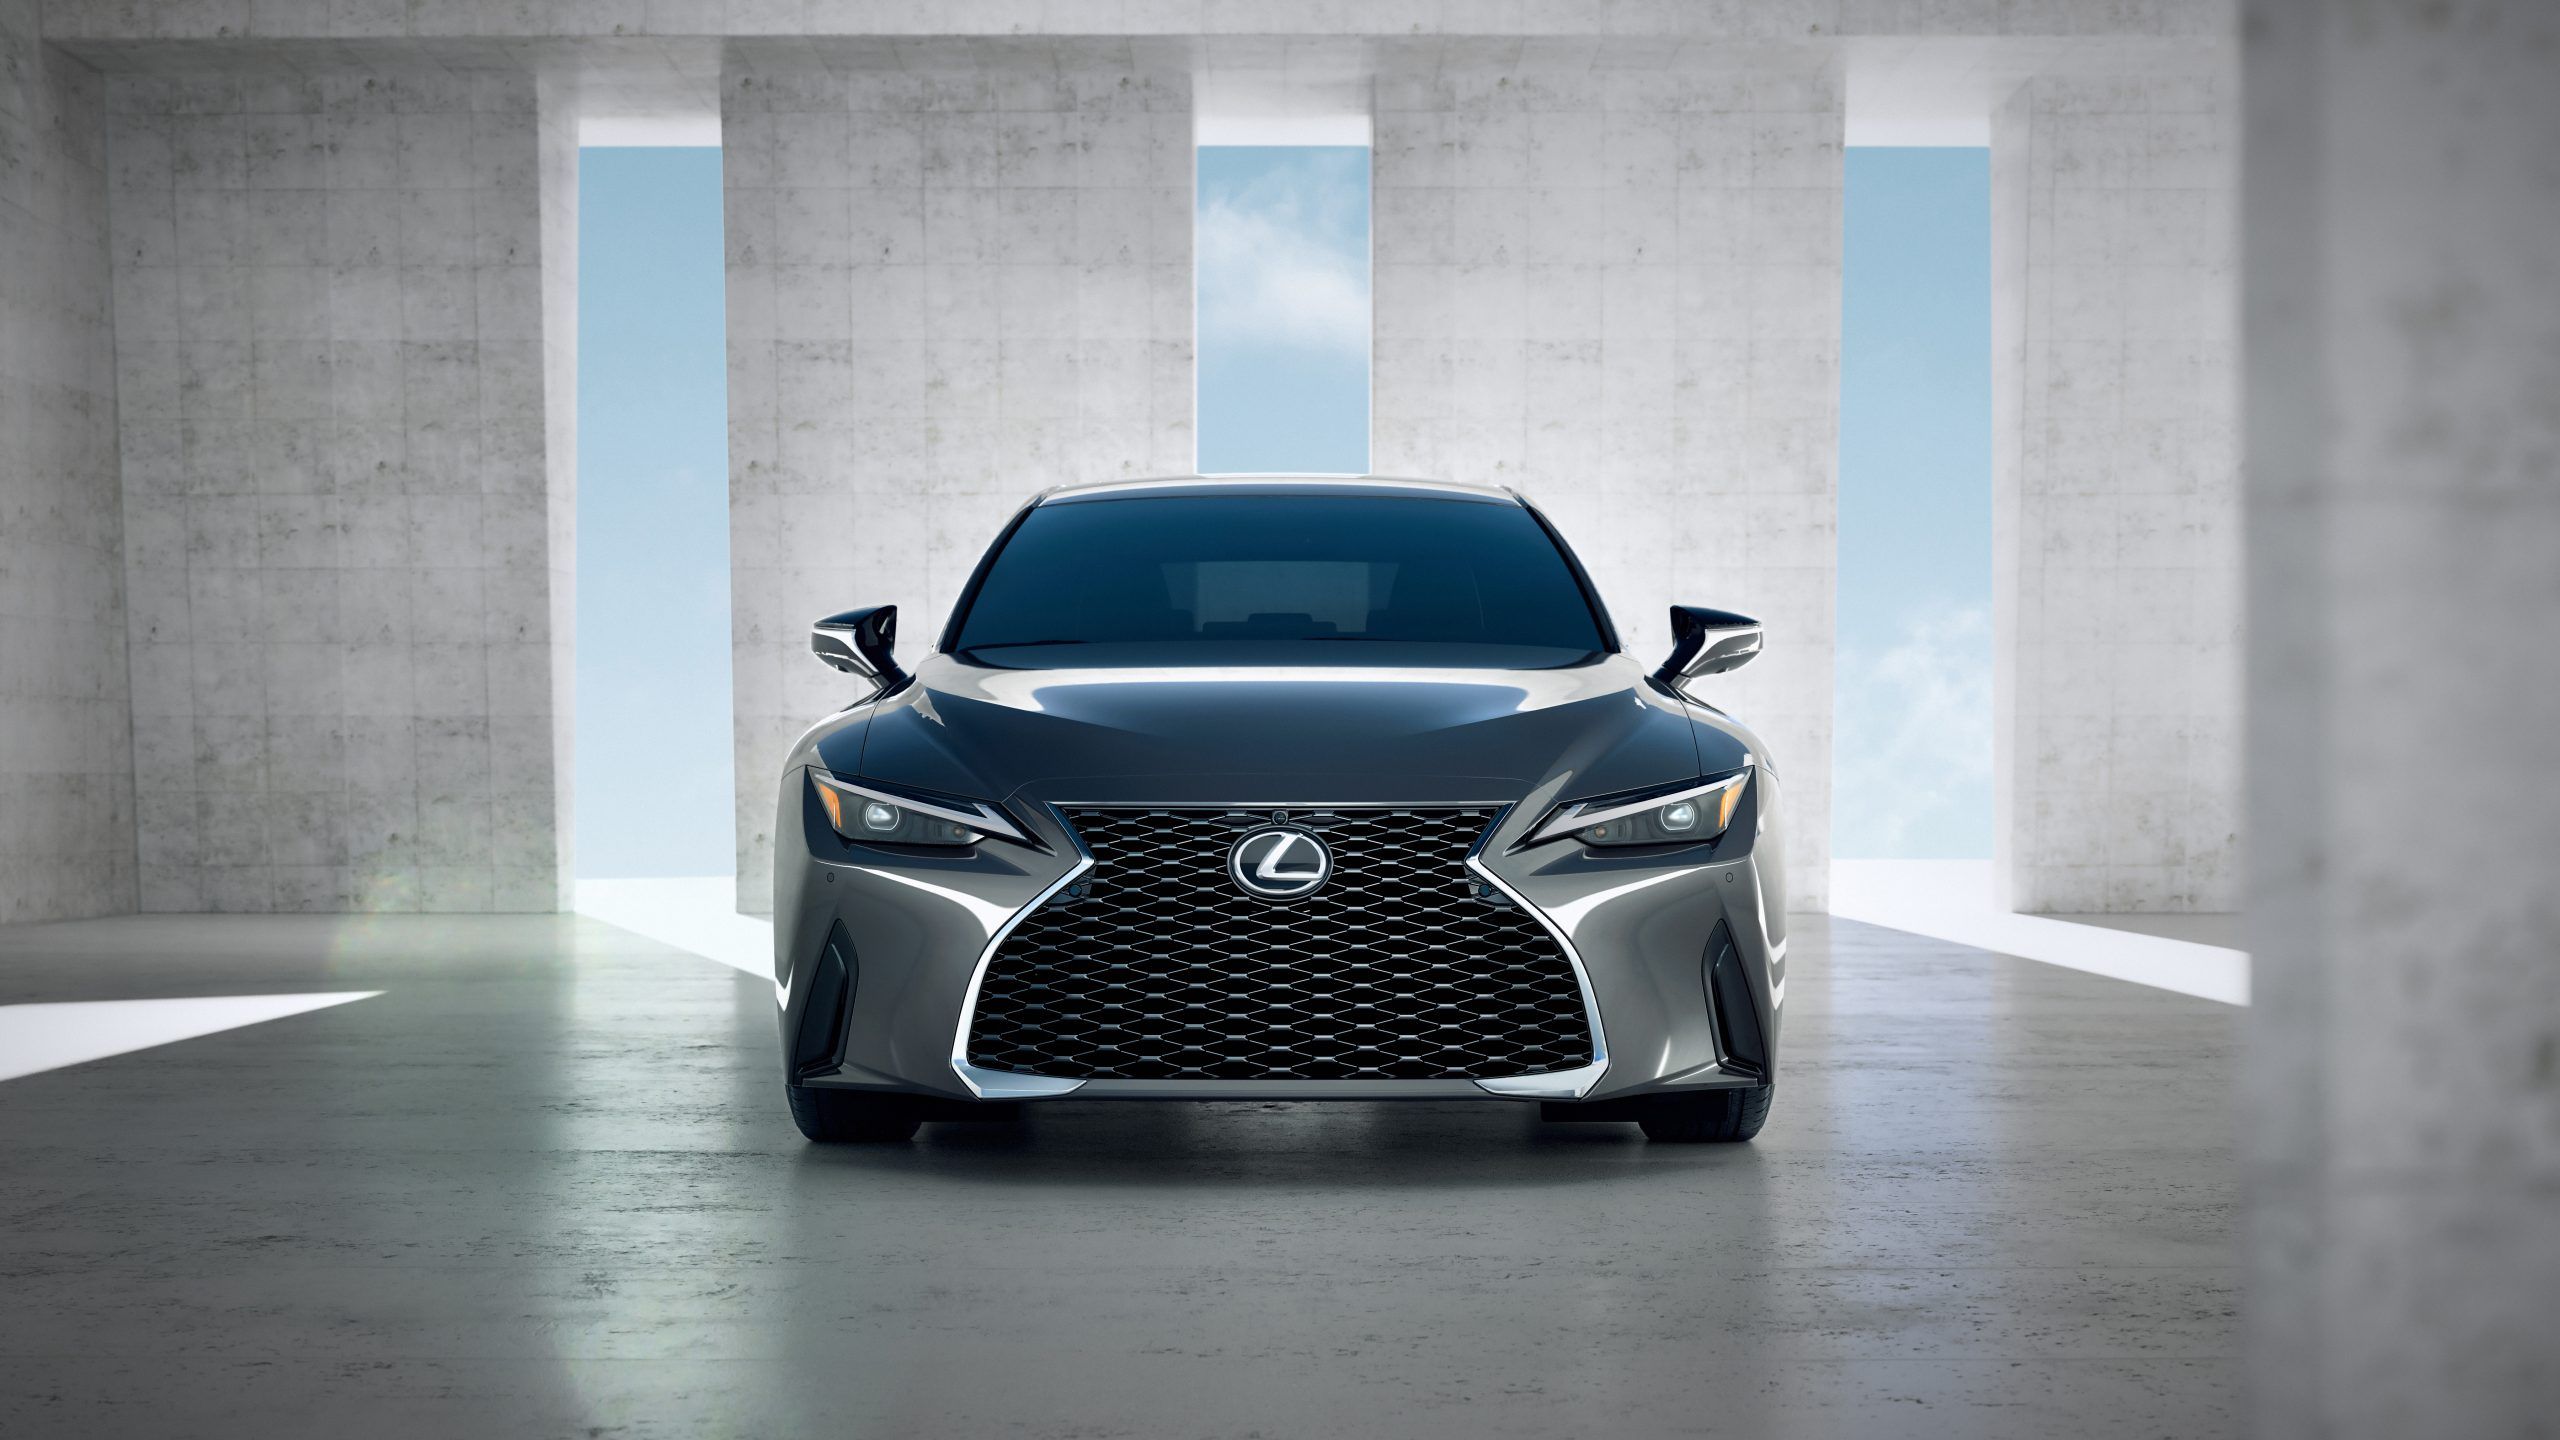 Lexus IS and Improved In Some Areas